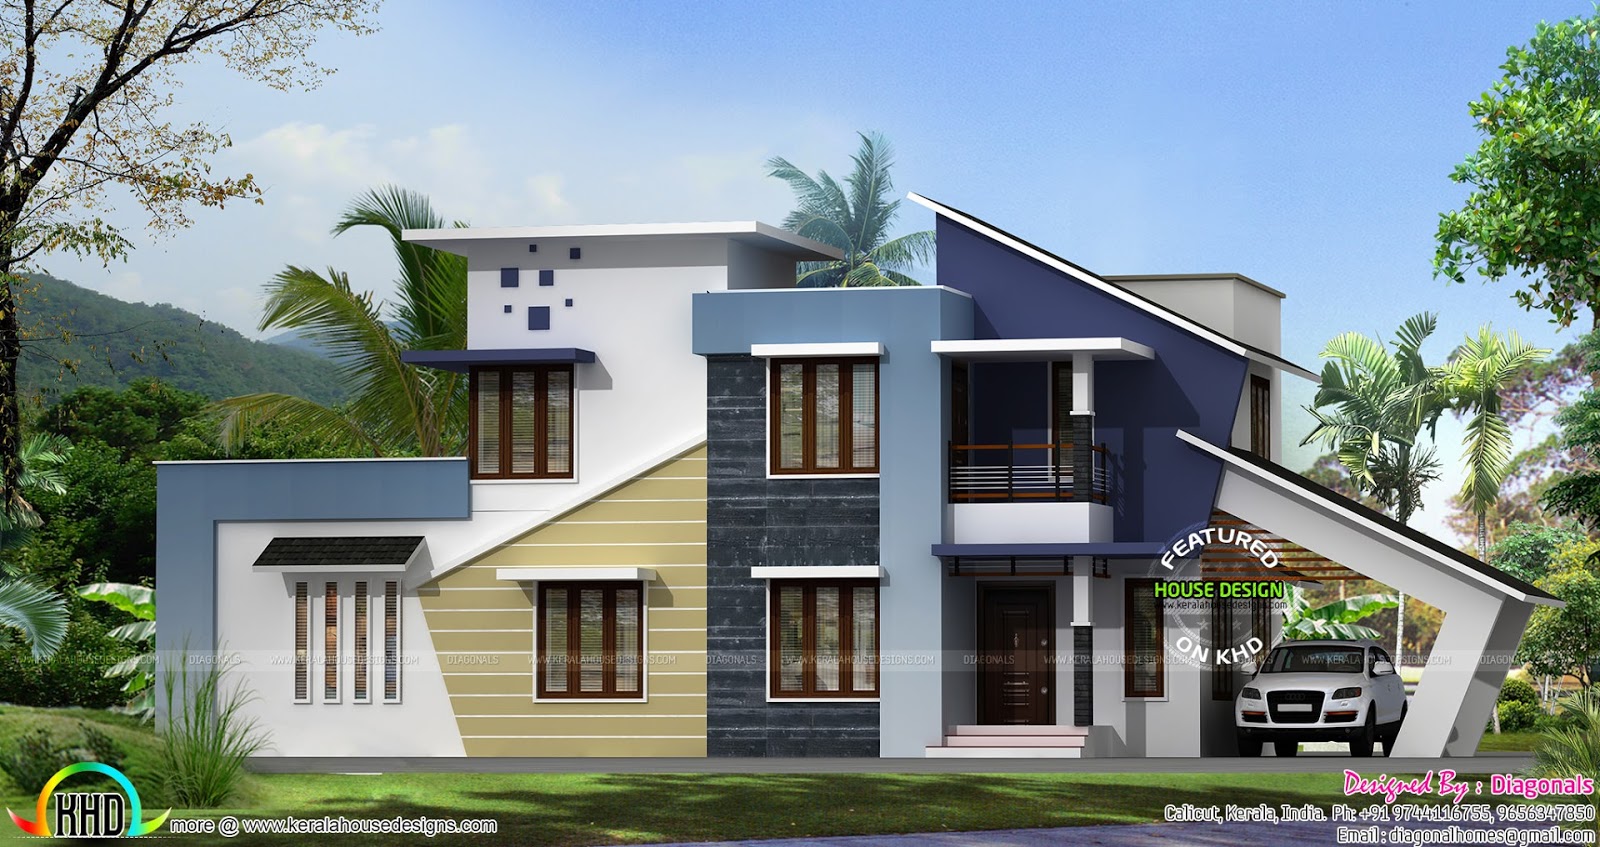  House  Designs  New home  designs  latest modern  house  